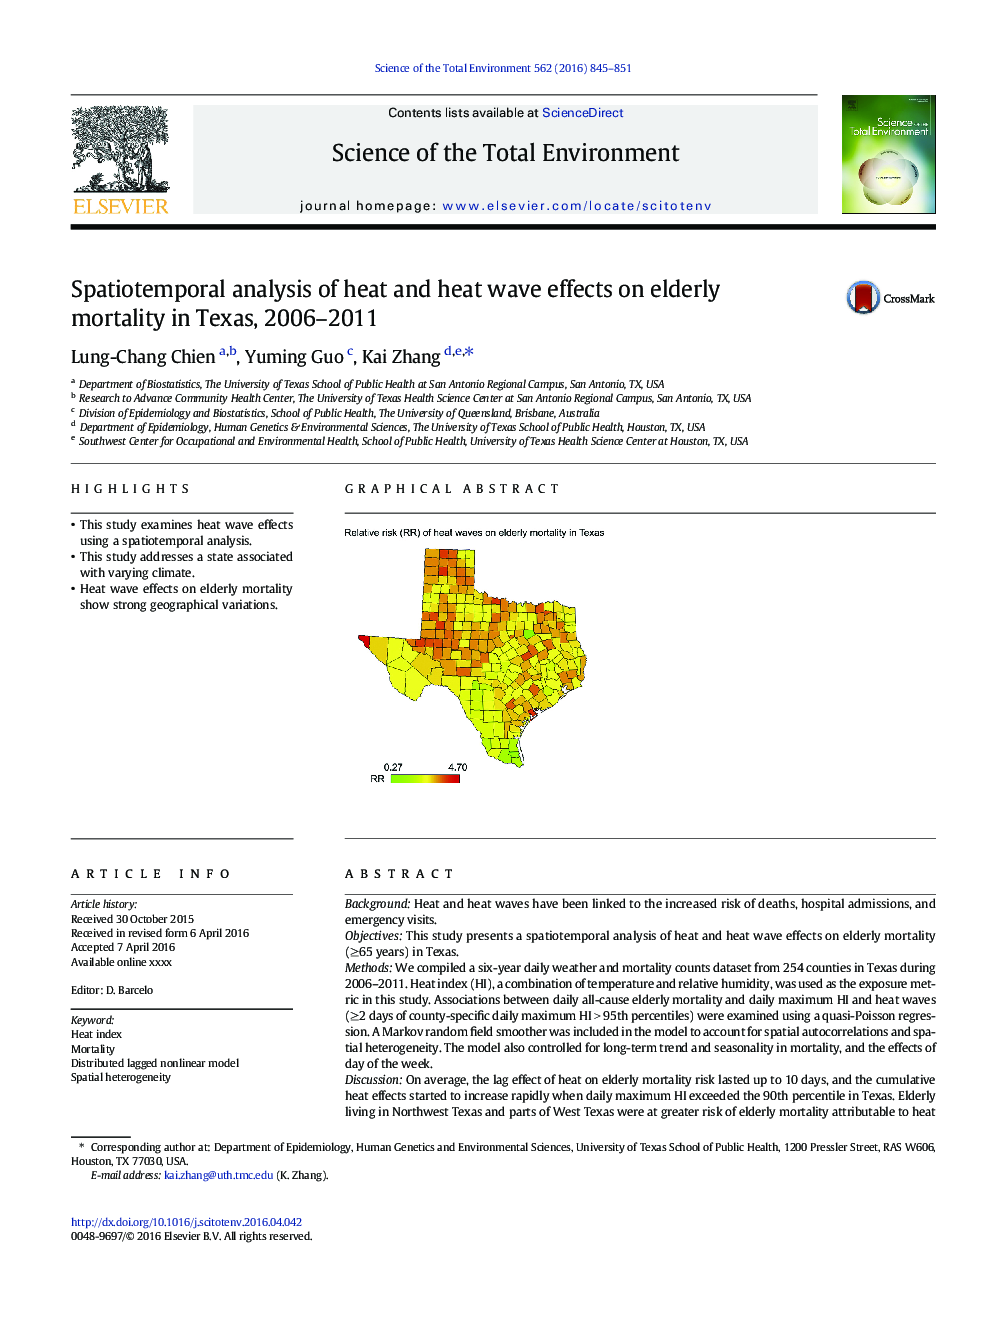 Spatiotemporal analysis of heat and heat wave effects on elderly mortality in Texas, 2006-2011